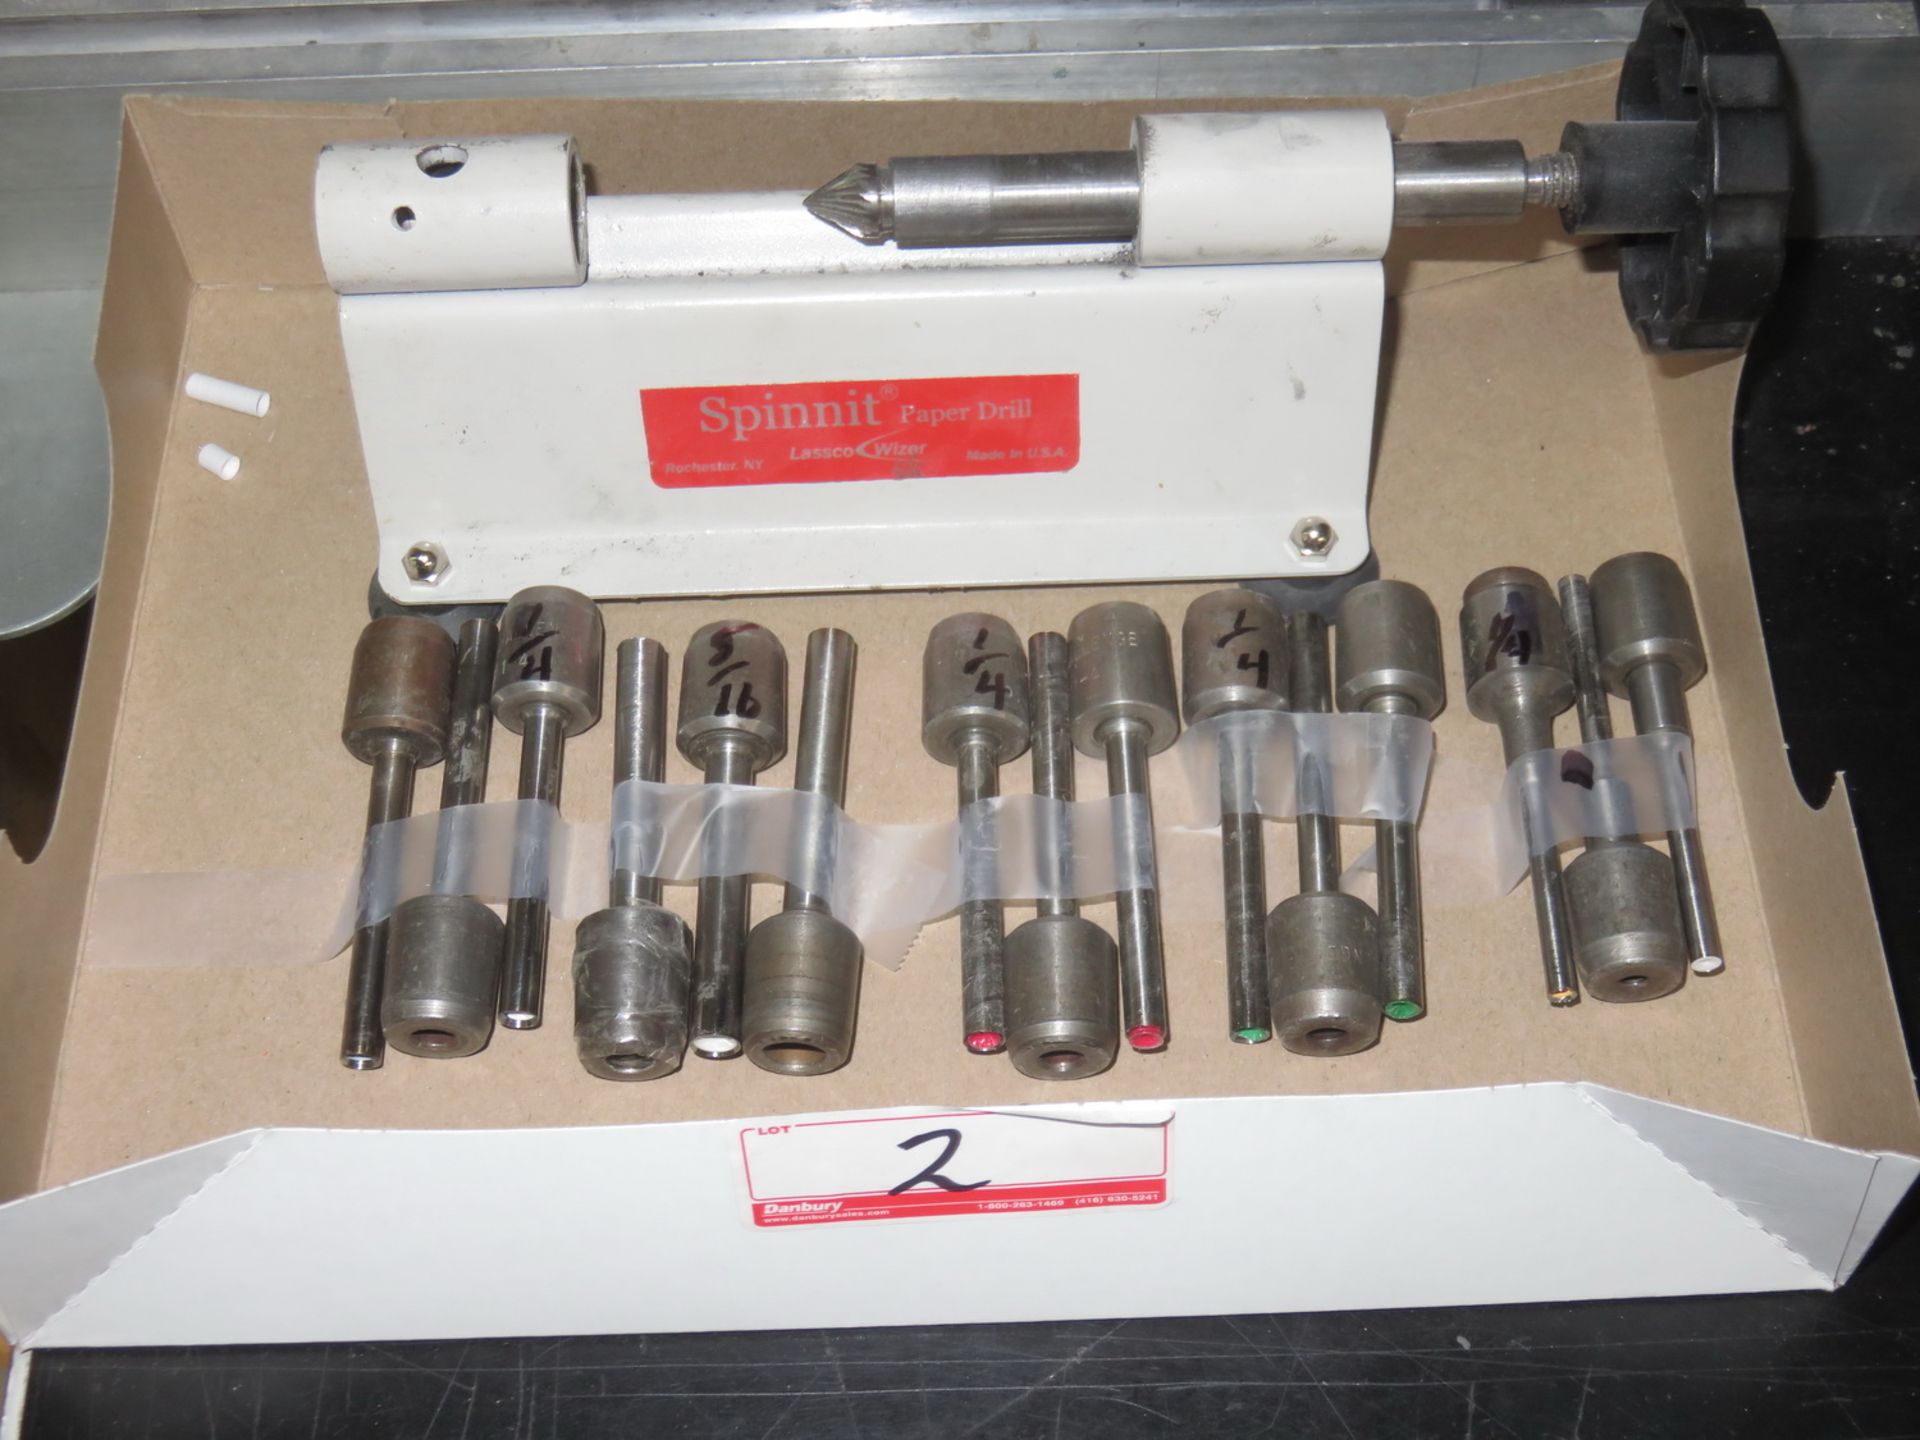 CHALLENGE EH-3A 3-HOLE PAPER DRILL C/W EXTRA DRILL BITS & HAND DRILL BIT SHARPENER - Image 2 of 3